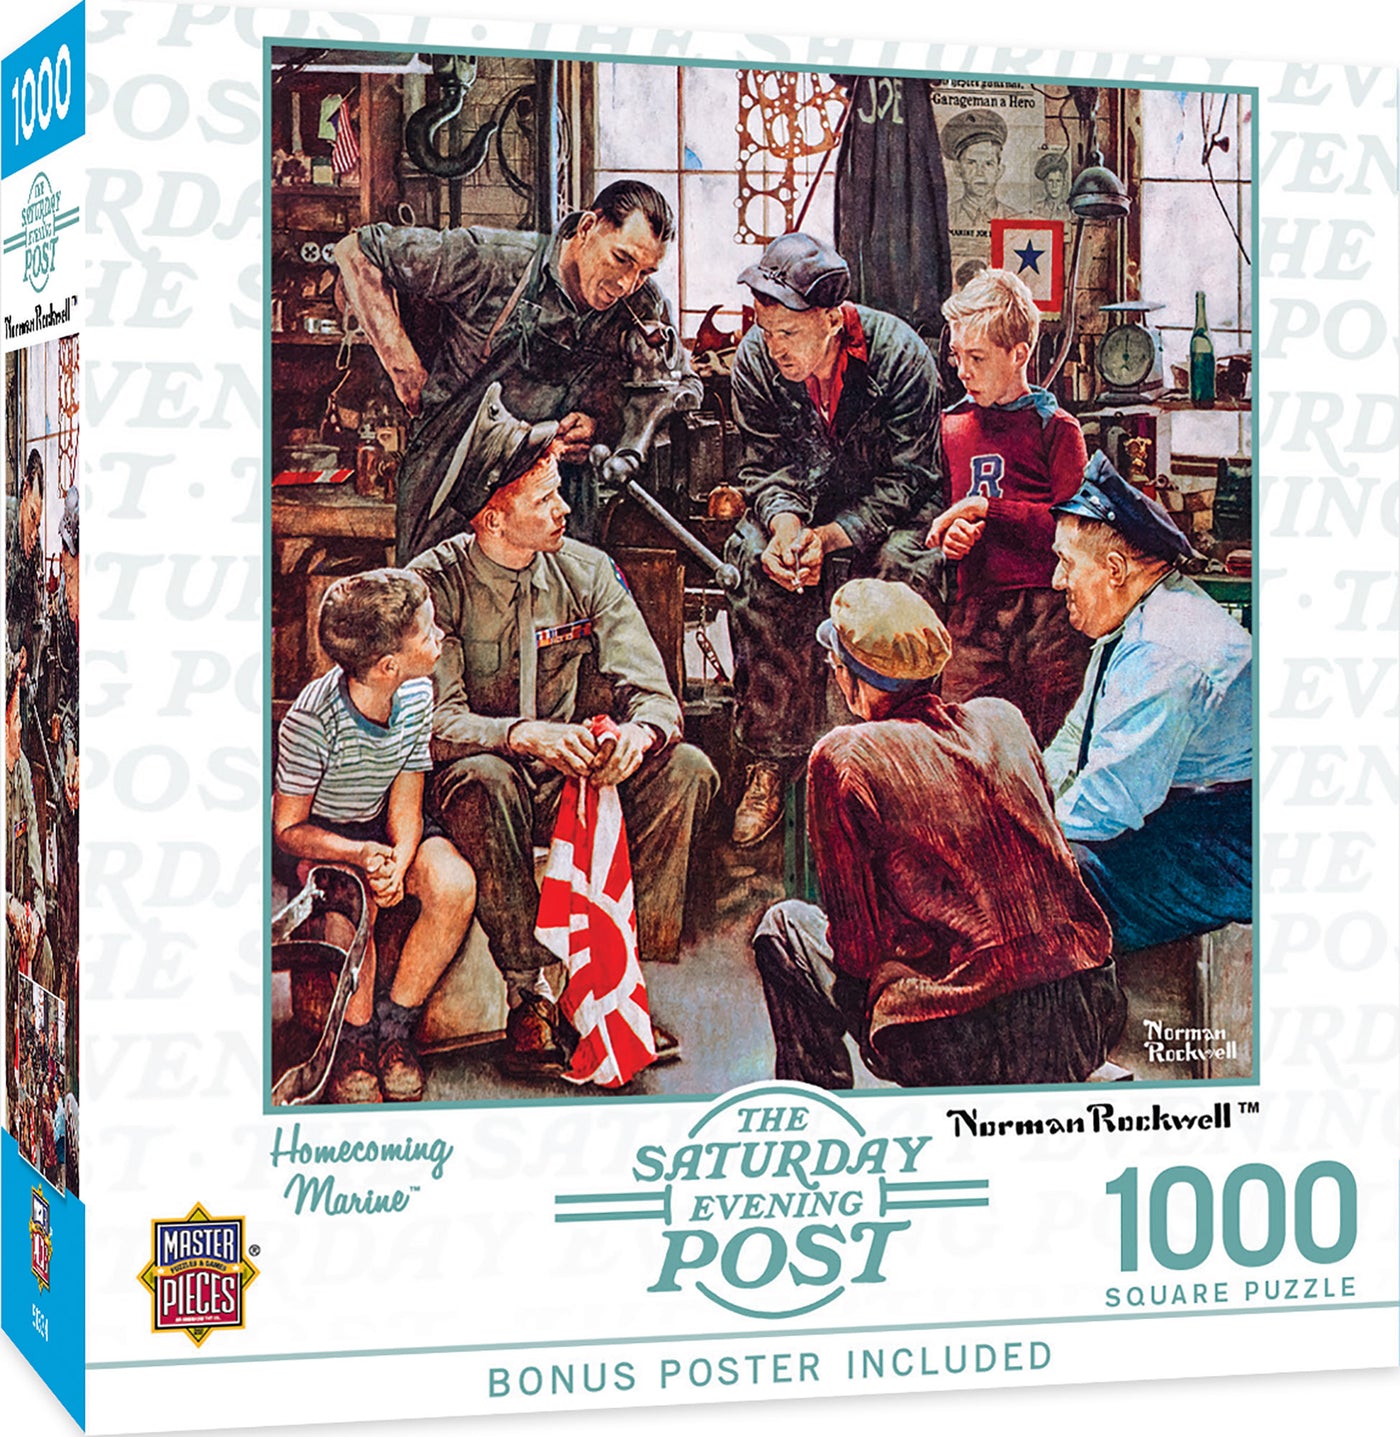 HOMECOMING MARINE by Norman Rockwell Jigsaw Puzzle - Texas Time Gifts and Fine Art 220827